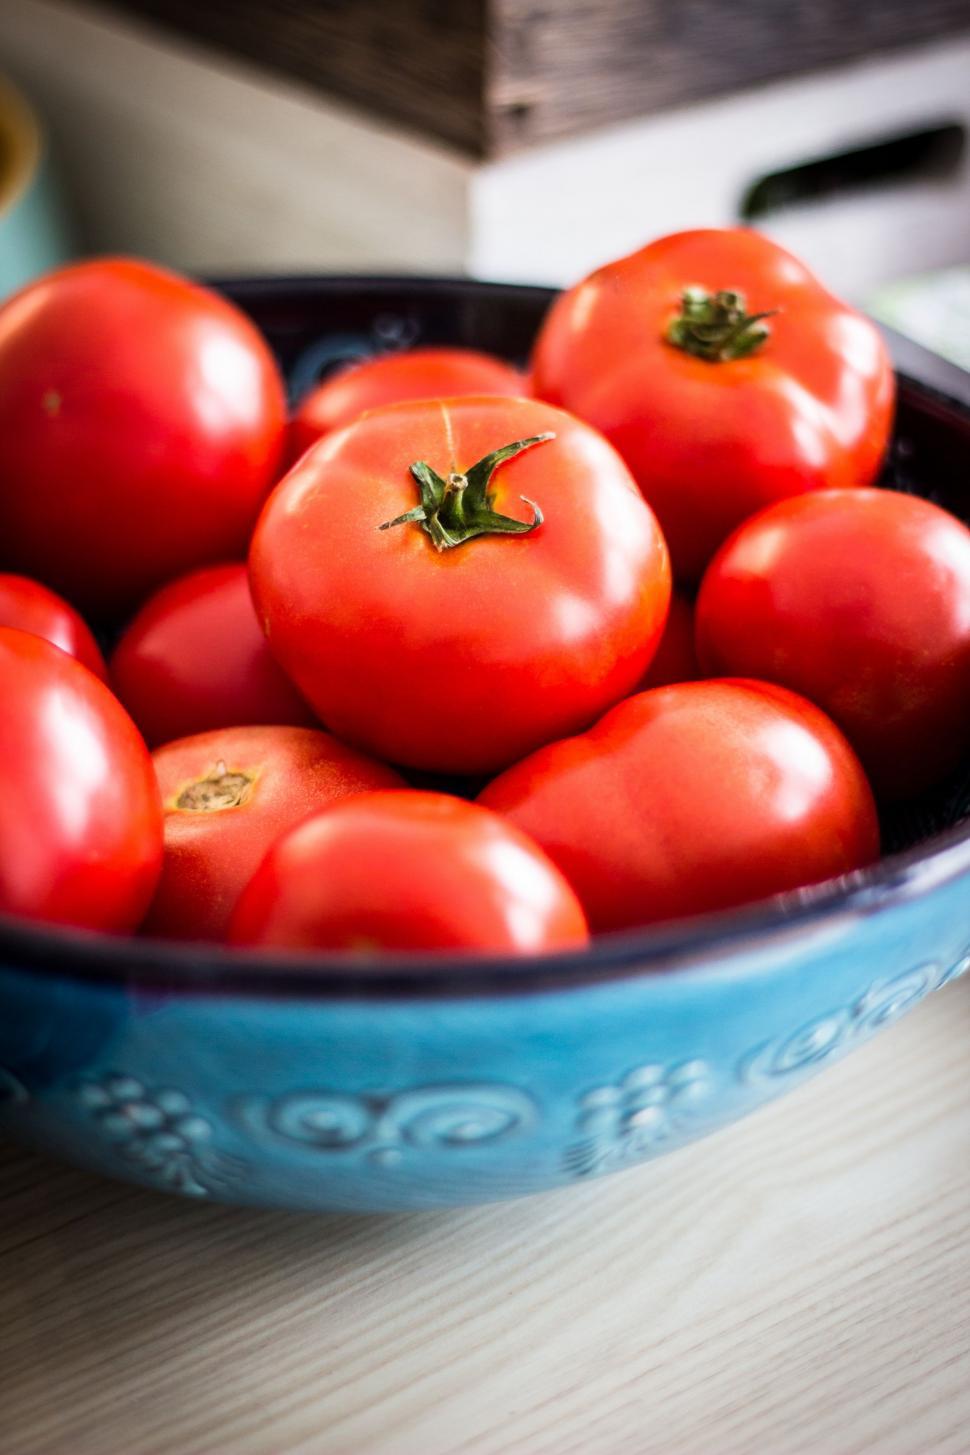 Free Image of Blue Bowl Filled With Red Tomatoes 